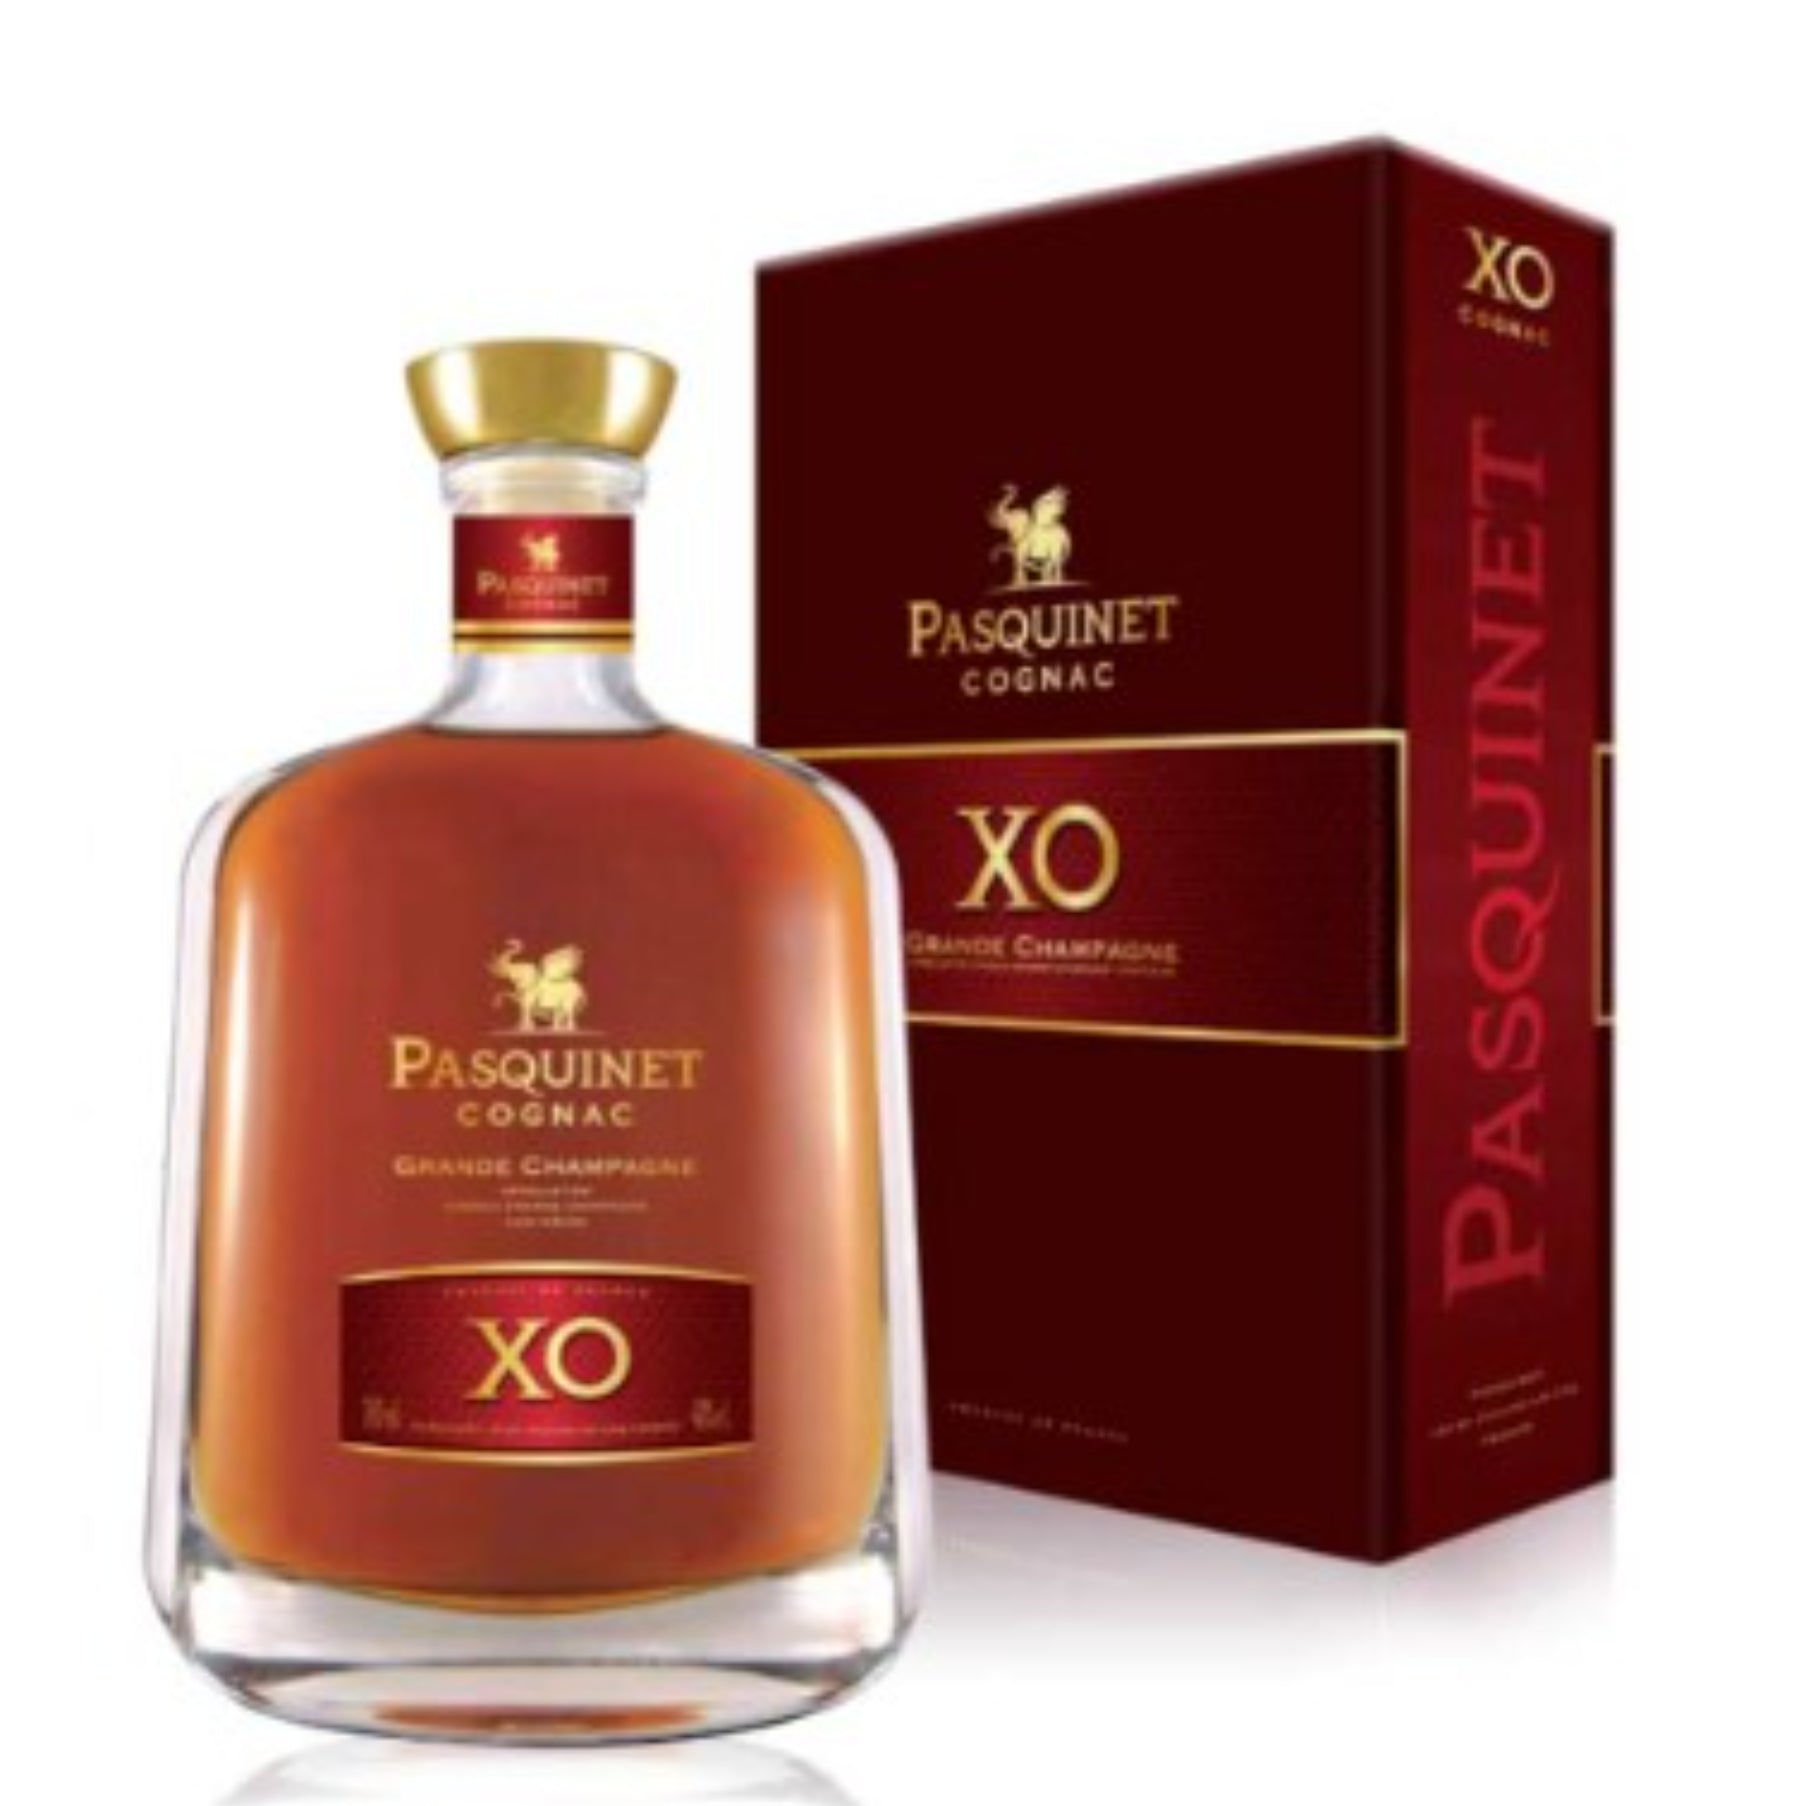 Buy Remy Martin XO Cognac x Lee Broom Limited Edition Online